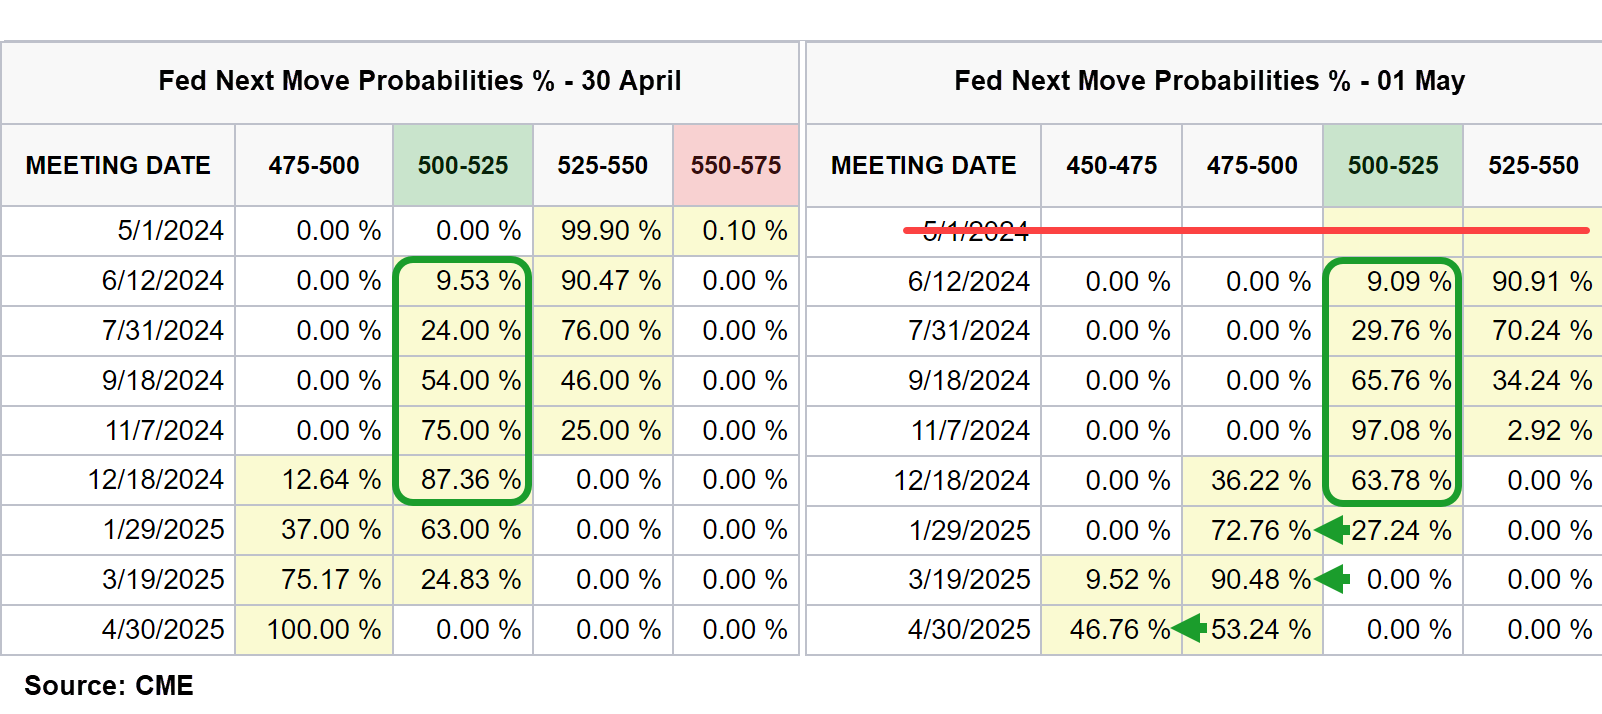 Fed Next Move Probabilities 1 May vs 30 April, Chairman Powell-s comments impact. Source CME MI